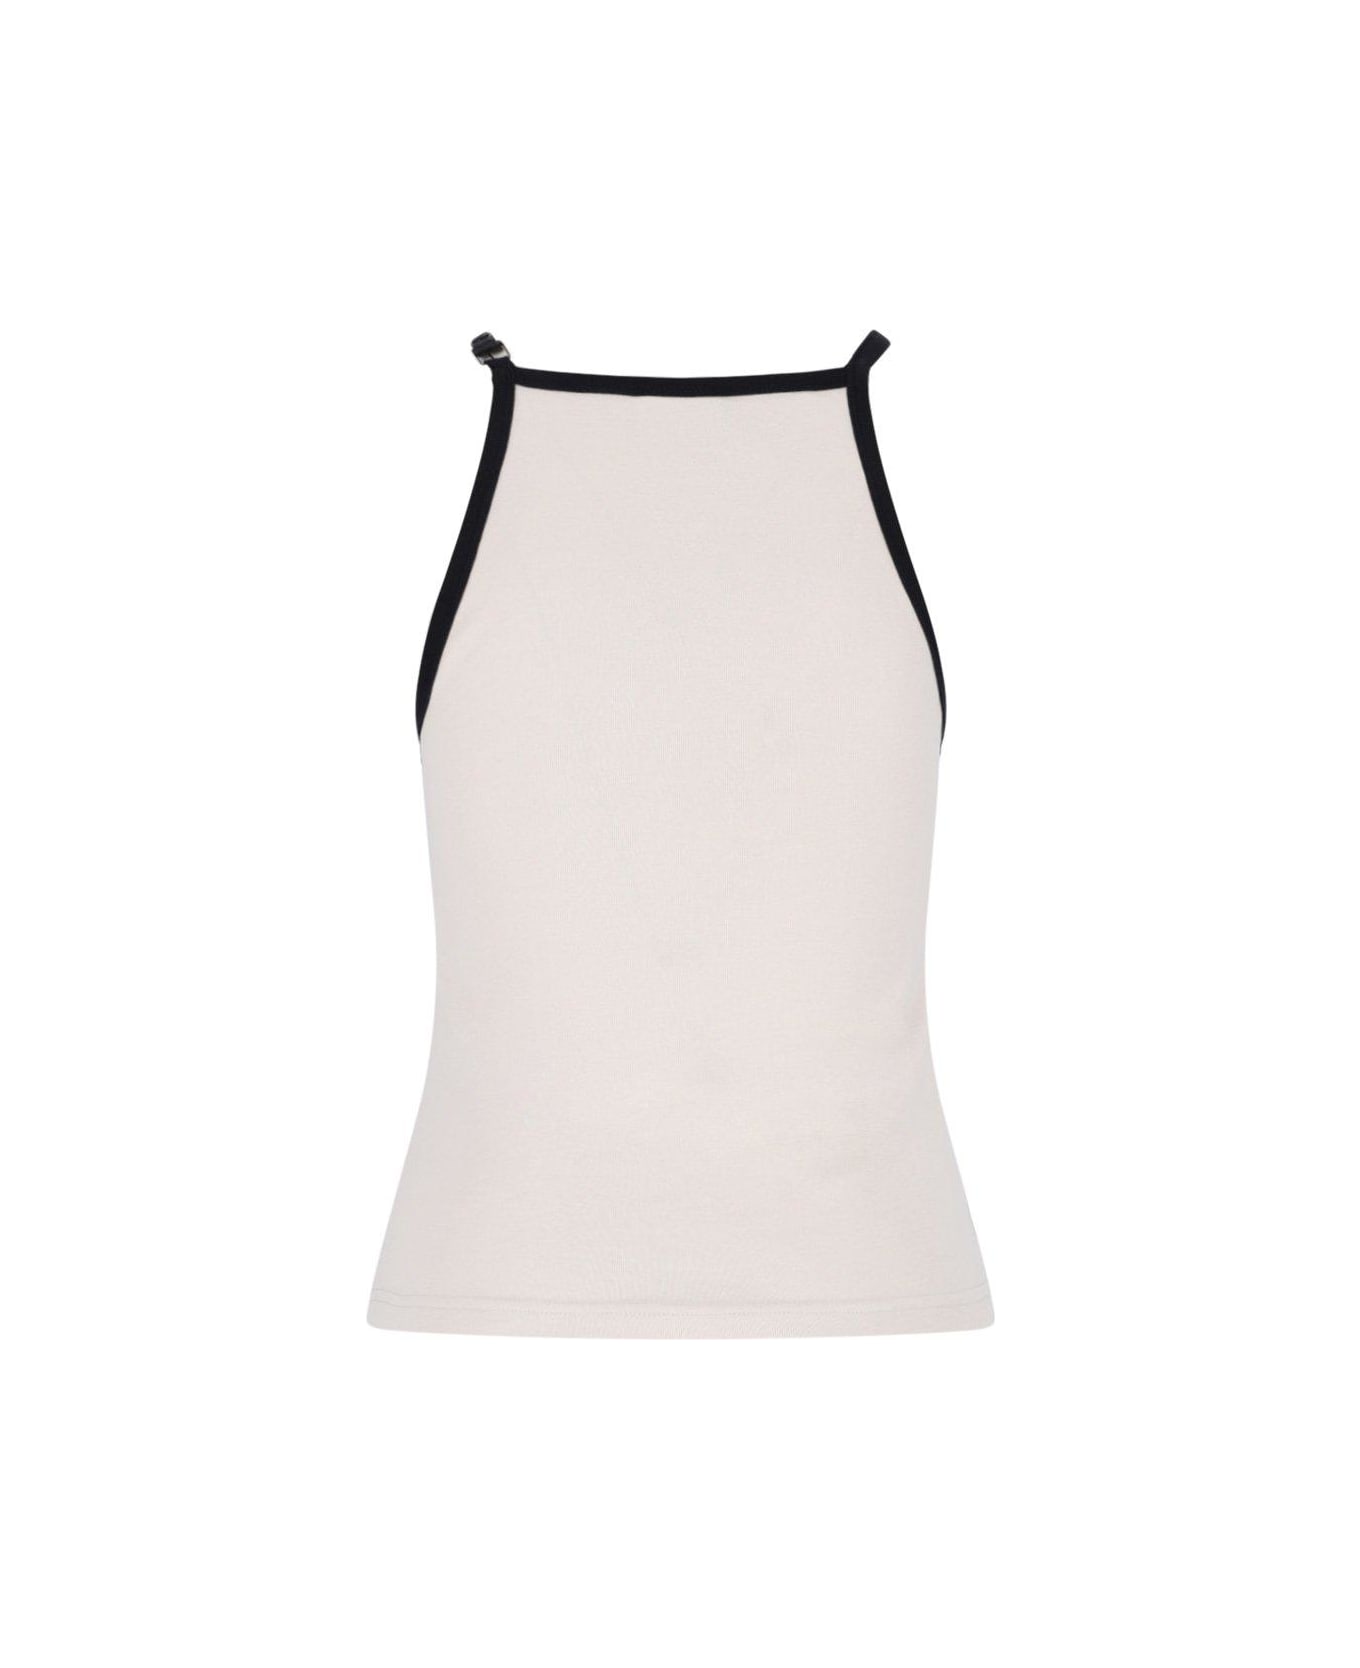 Courrèges Buckle Contrast Tank Top - Lime Stone Black タンクトップ